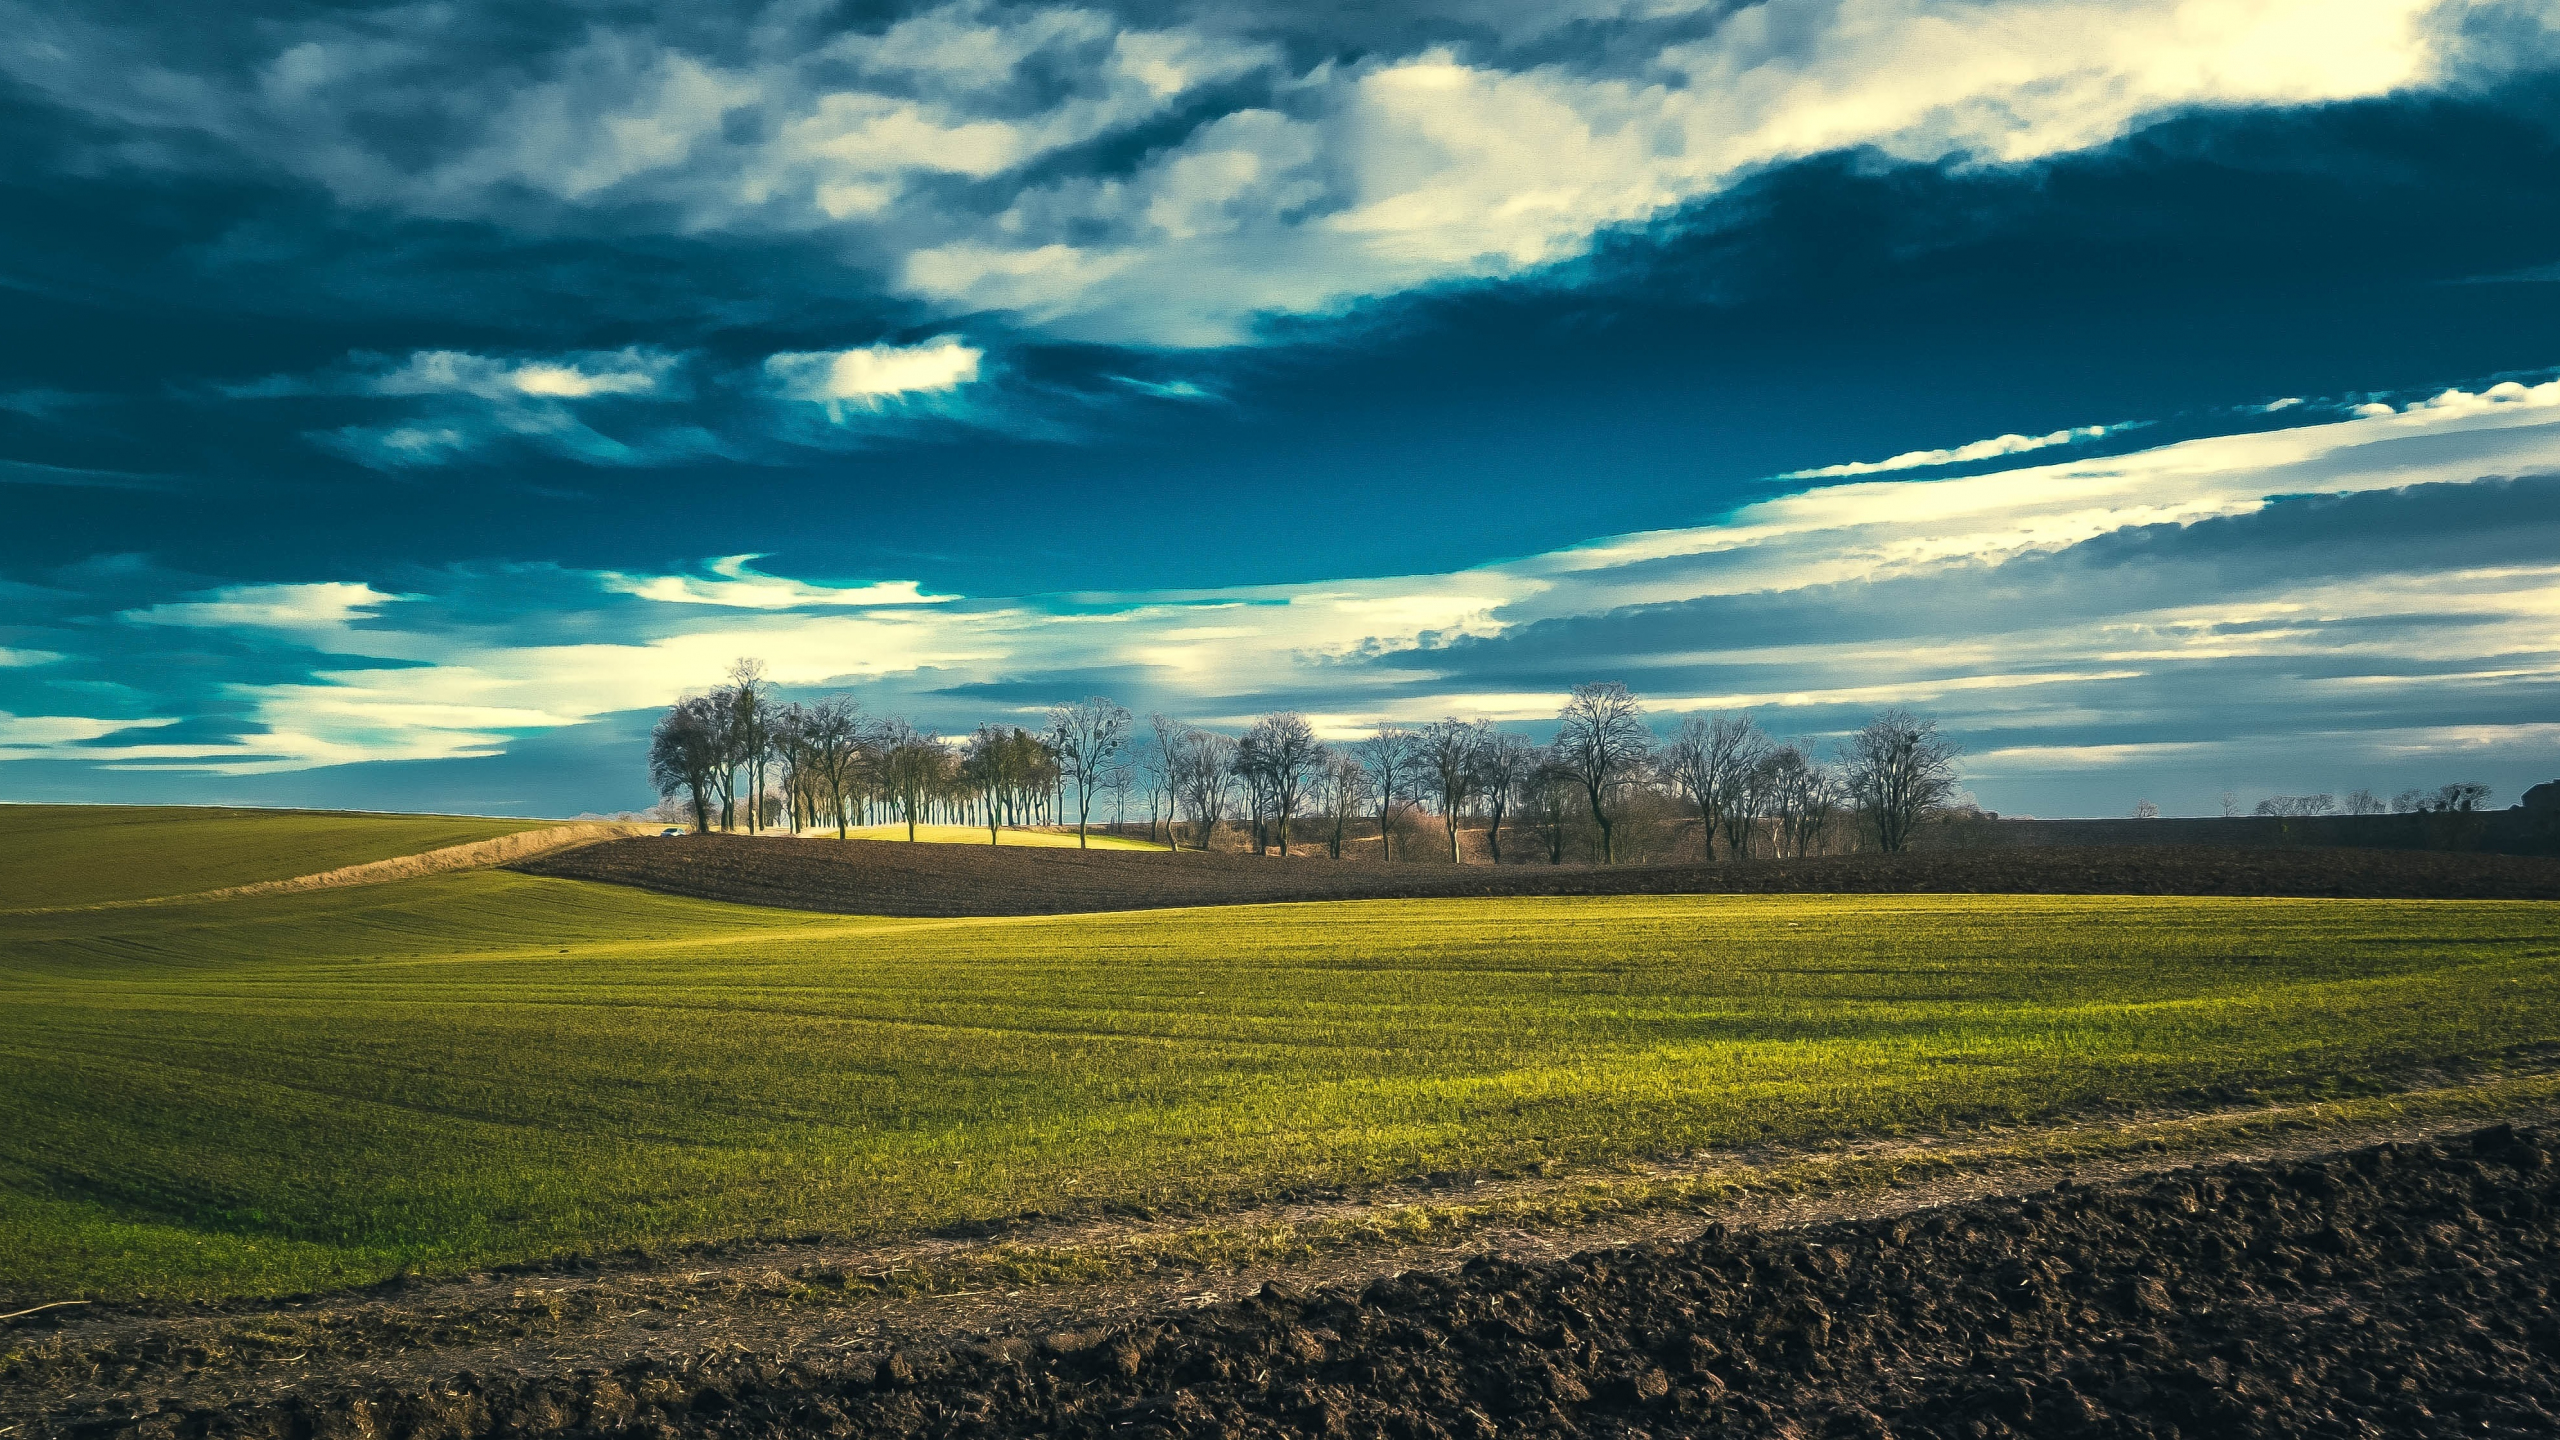 Download wallpaper 2560x1440 field, landscape, spring, blue sky, sunny day, dual wide 16:9 2560x1440 HD background, 10582